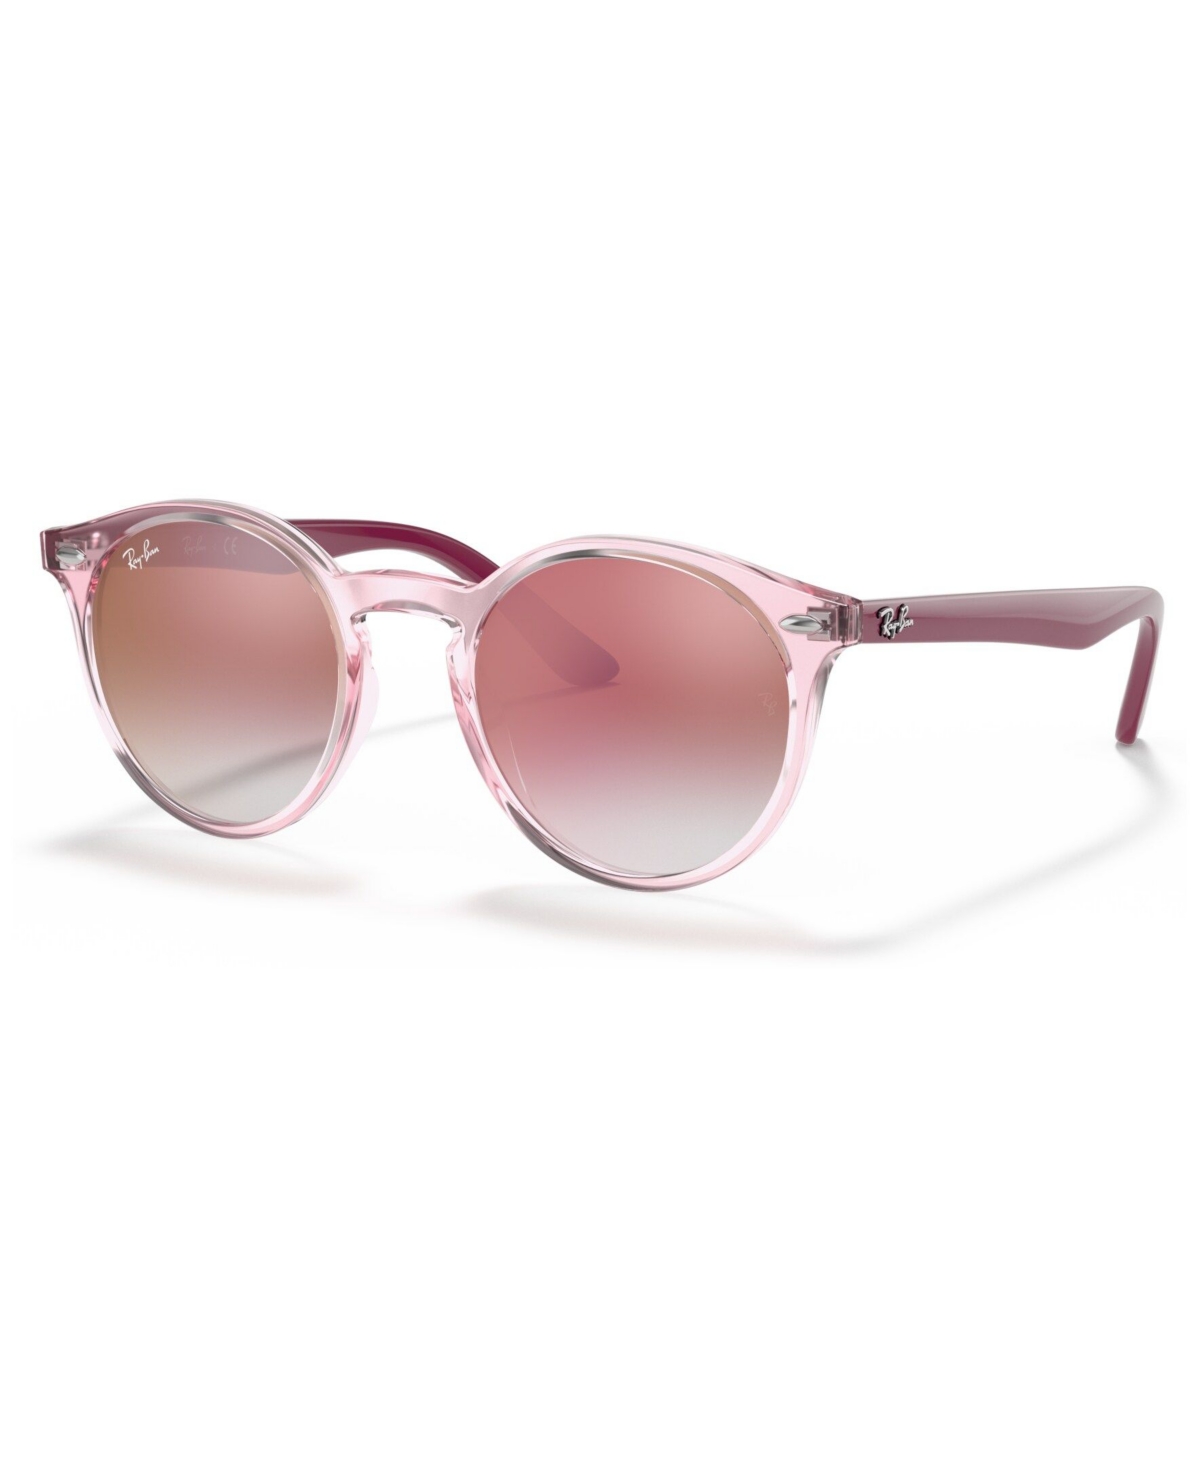 Ray-ban Jr . Kids Sunglasses, Rj9064 (ages 7-10) In Trasparent Pink,red Mirror Red